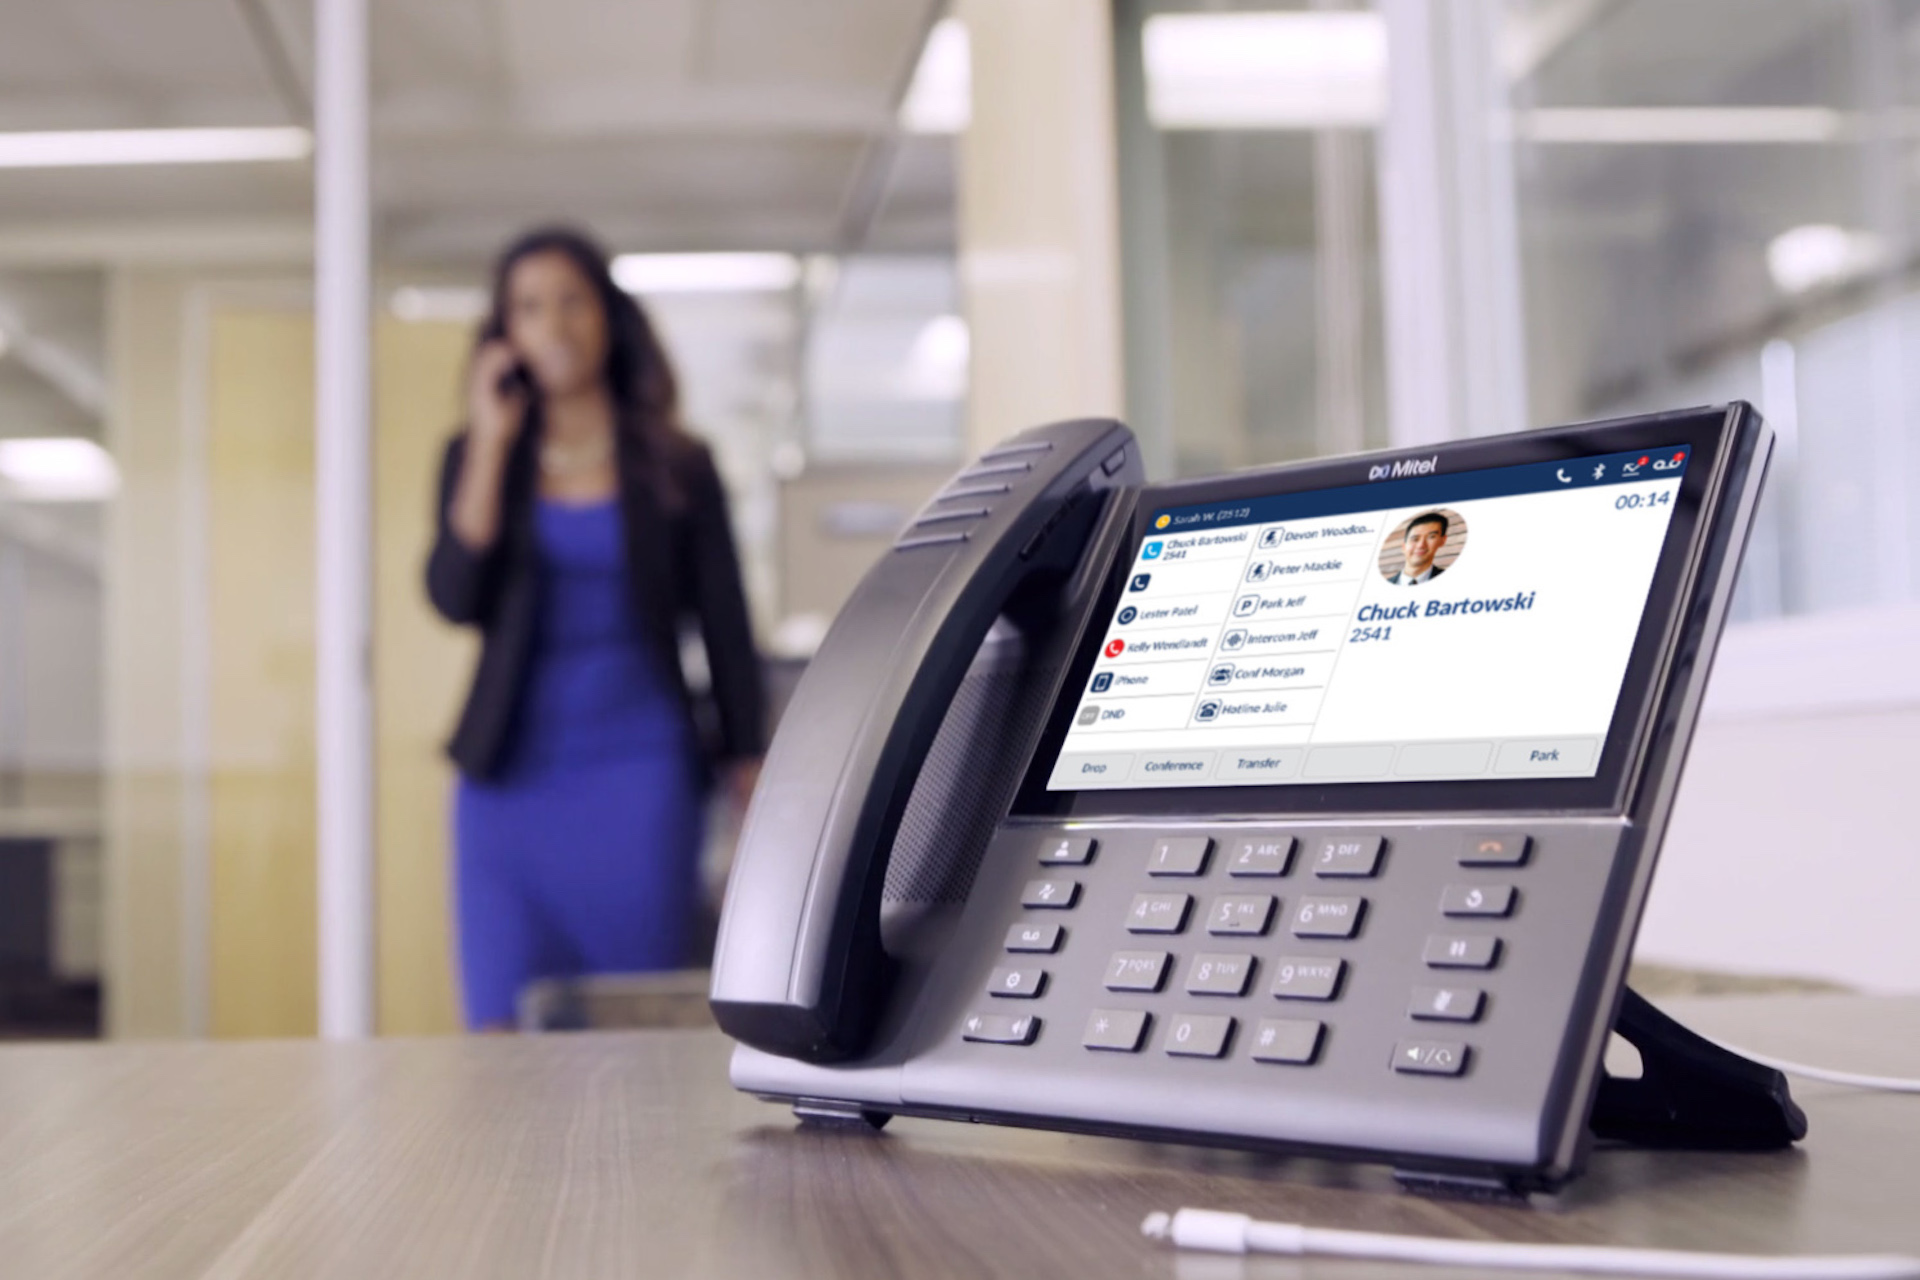 Best Handsets For Mitel Phone Systems Near me